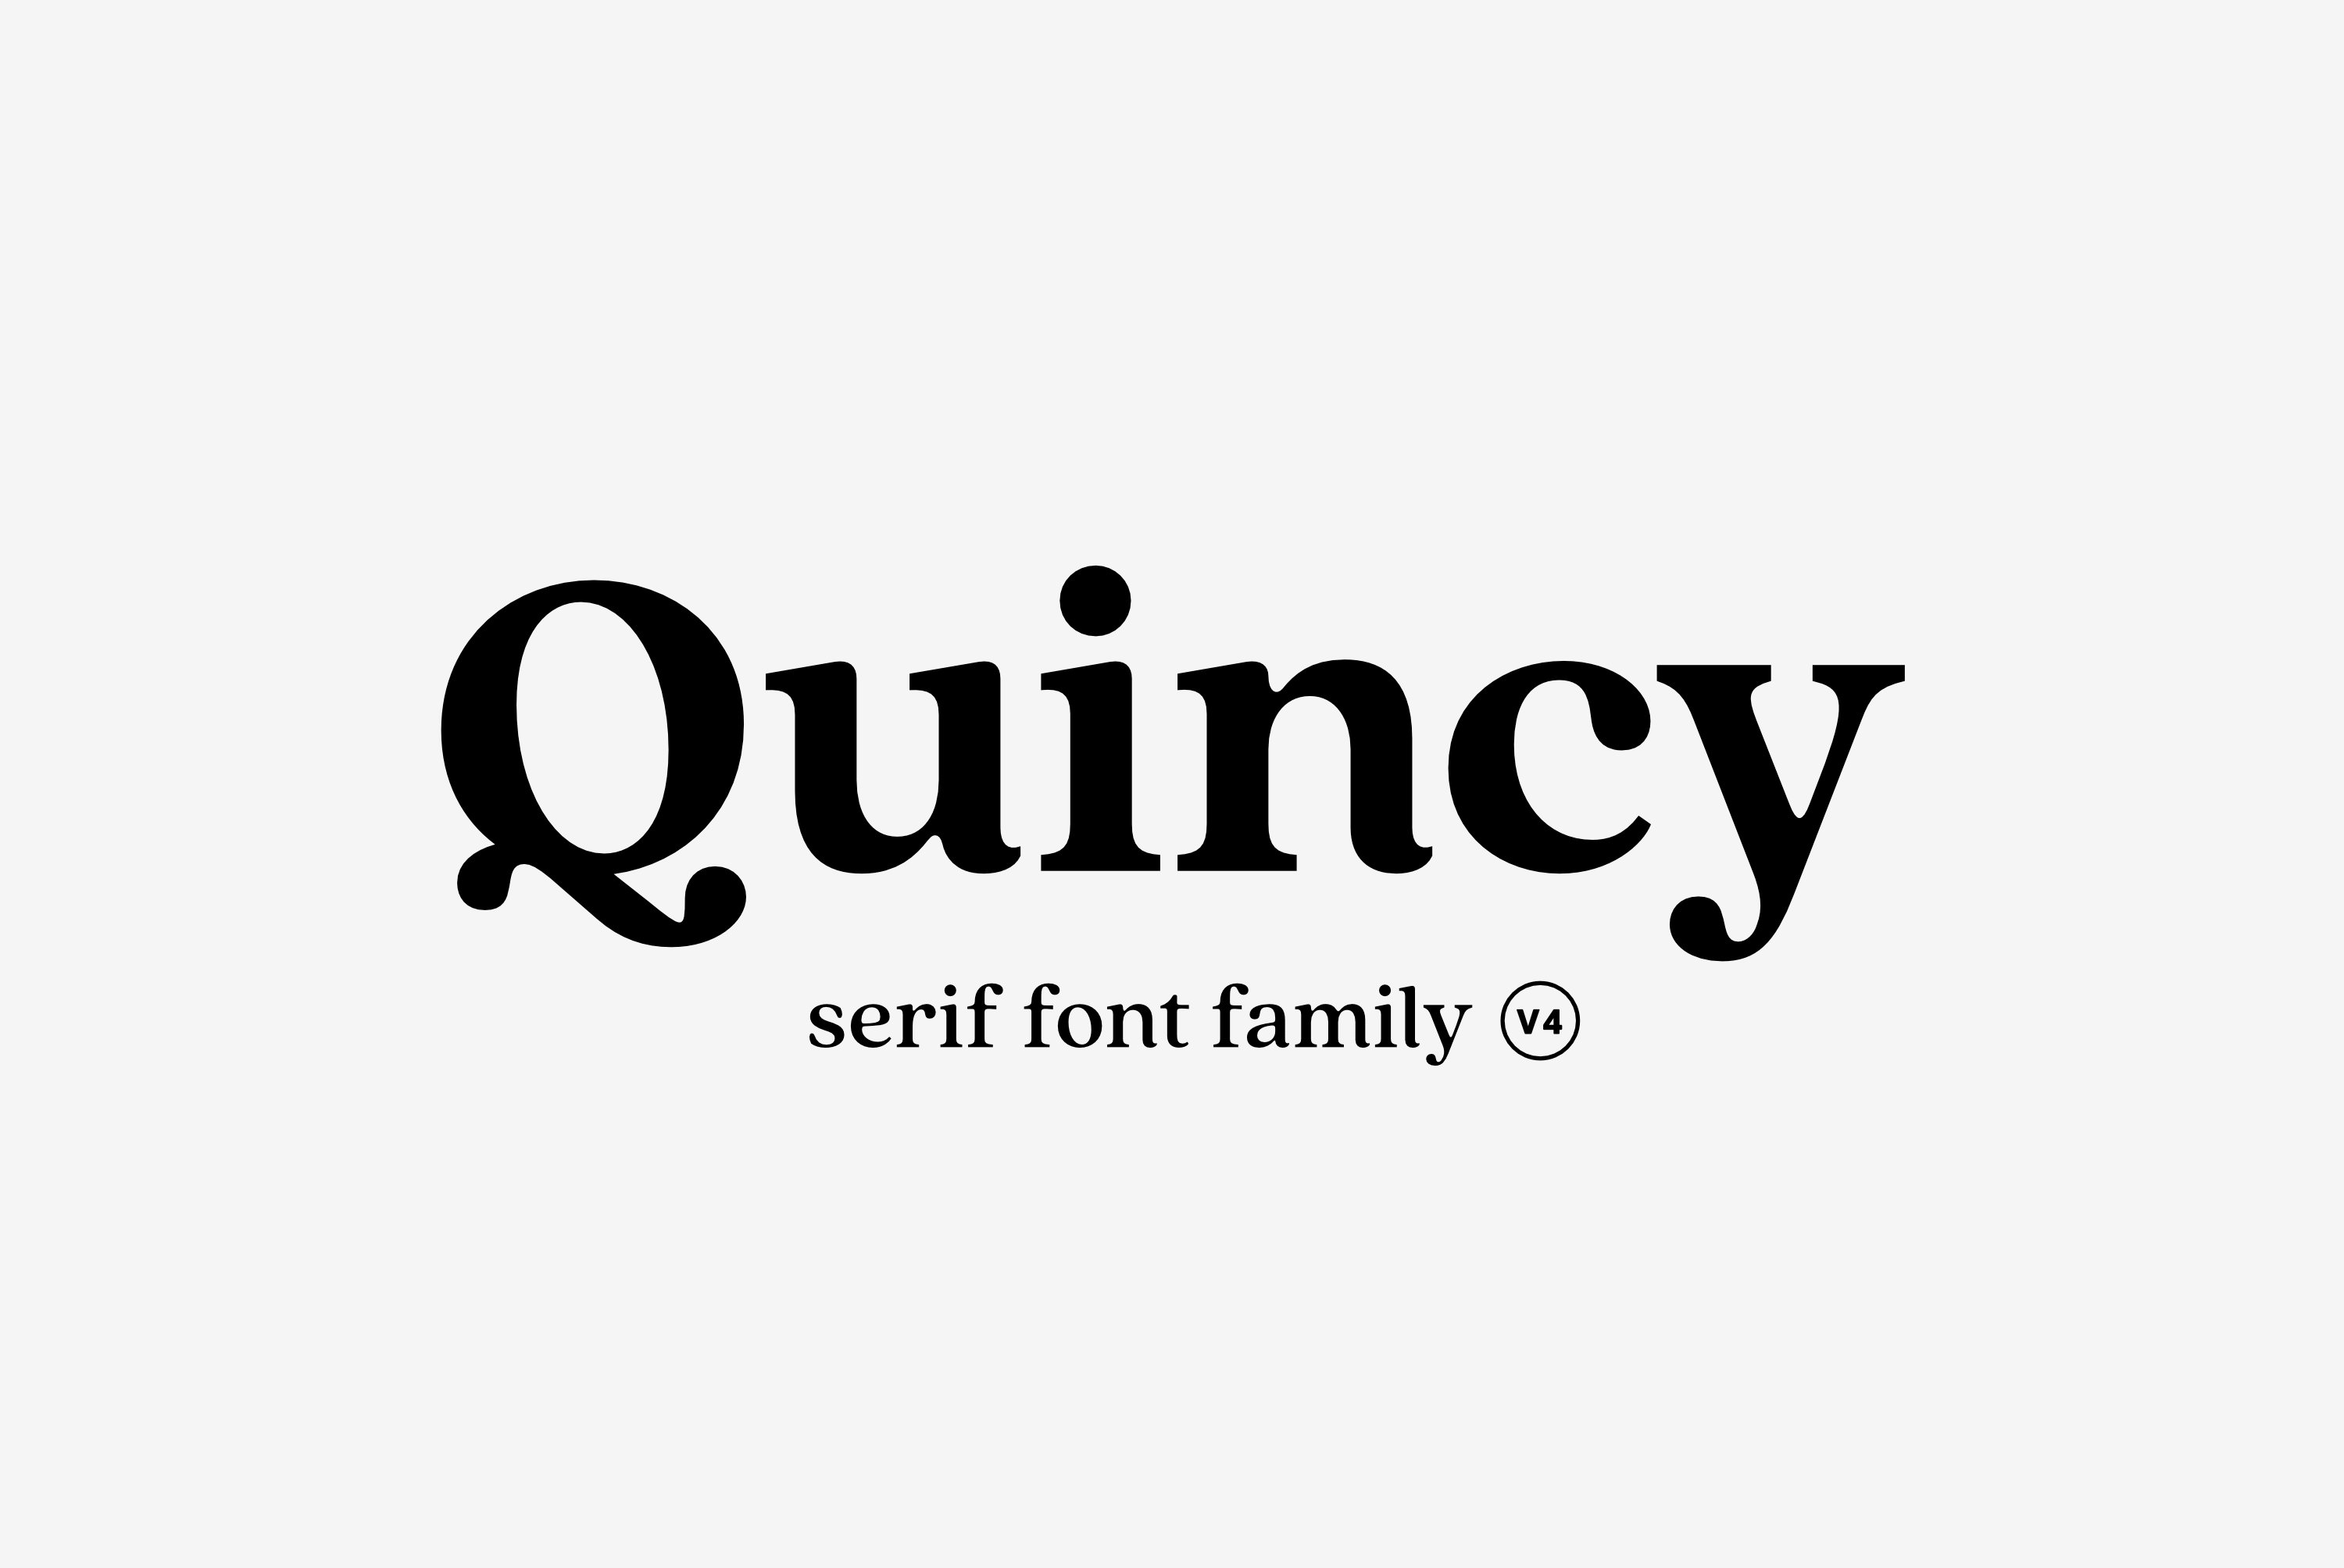 Quincy CF: vintage serif font family cover image.